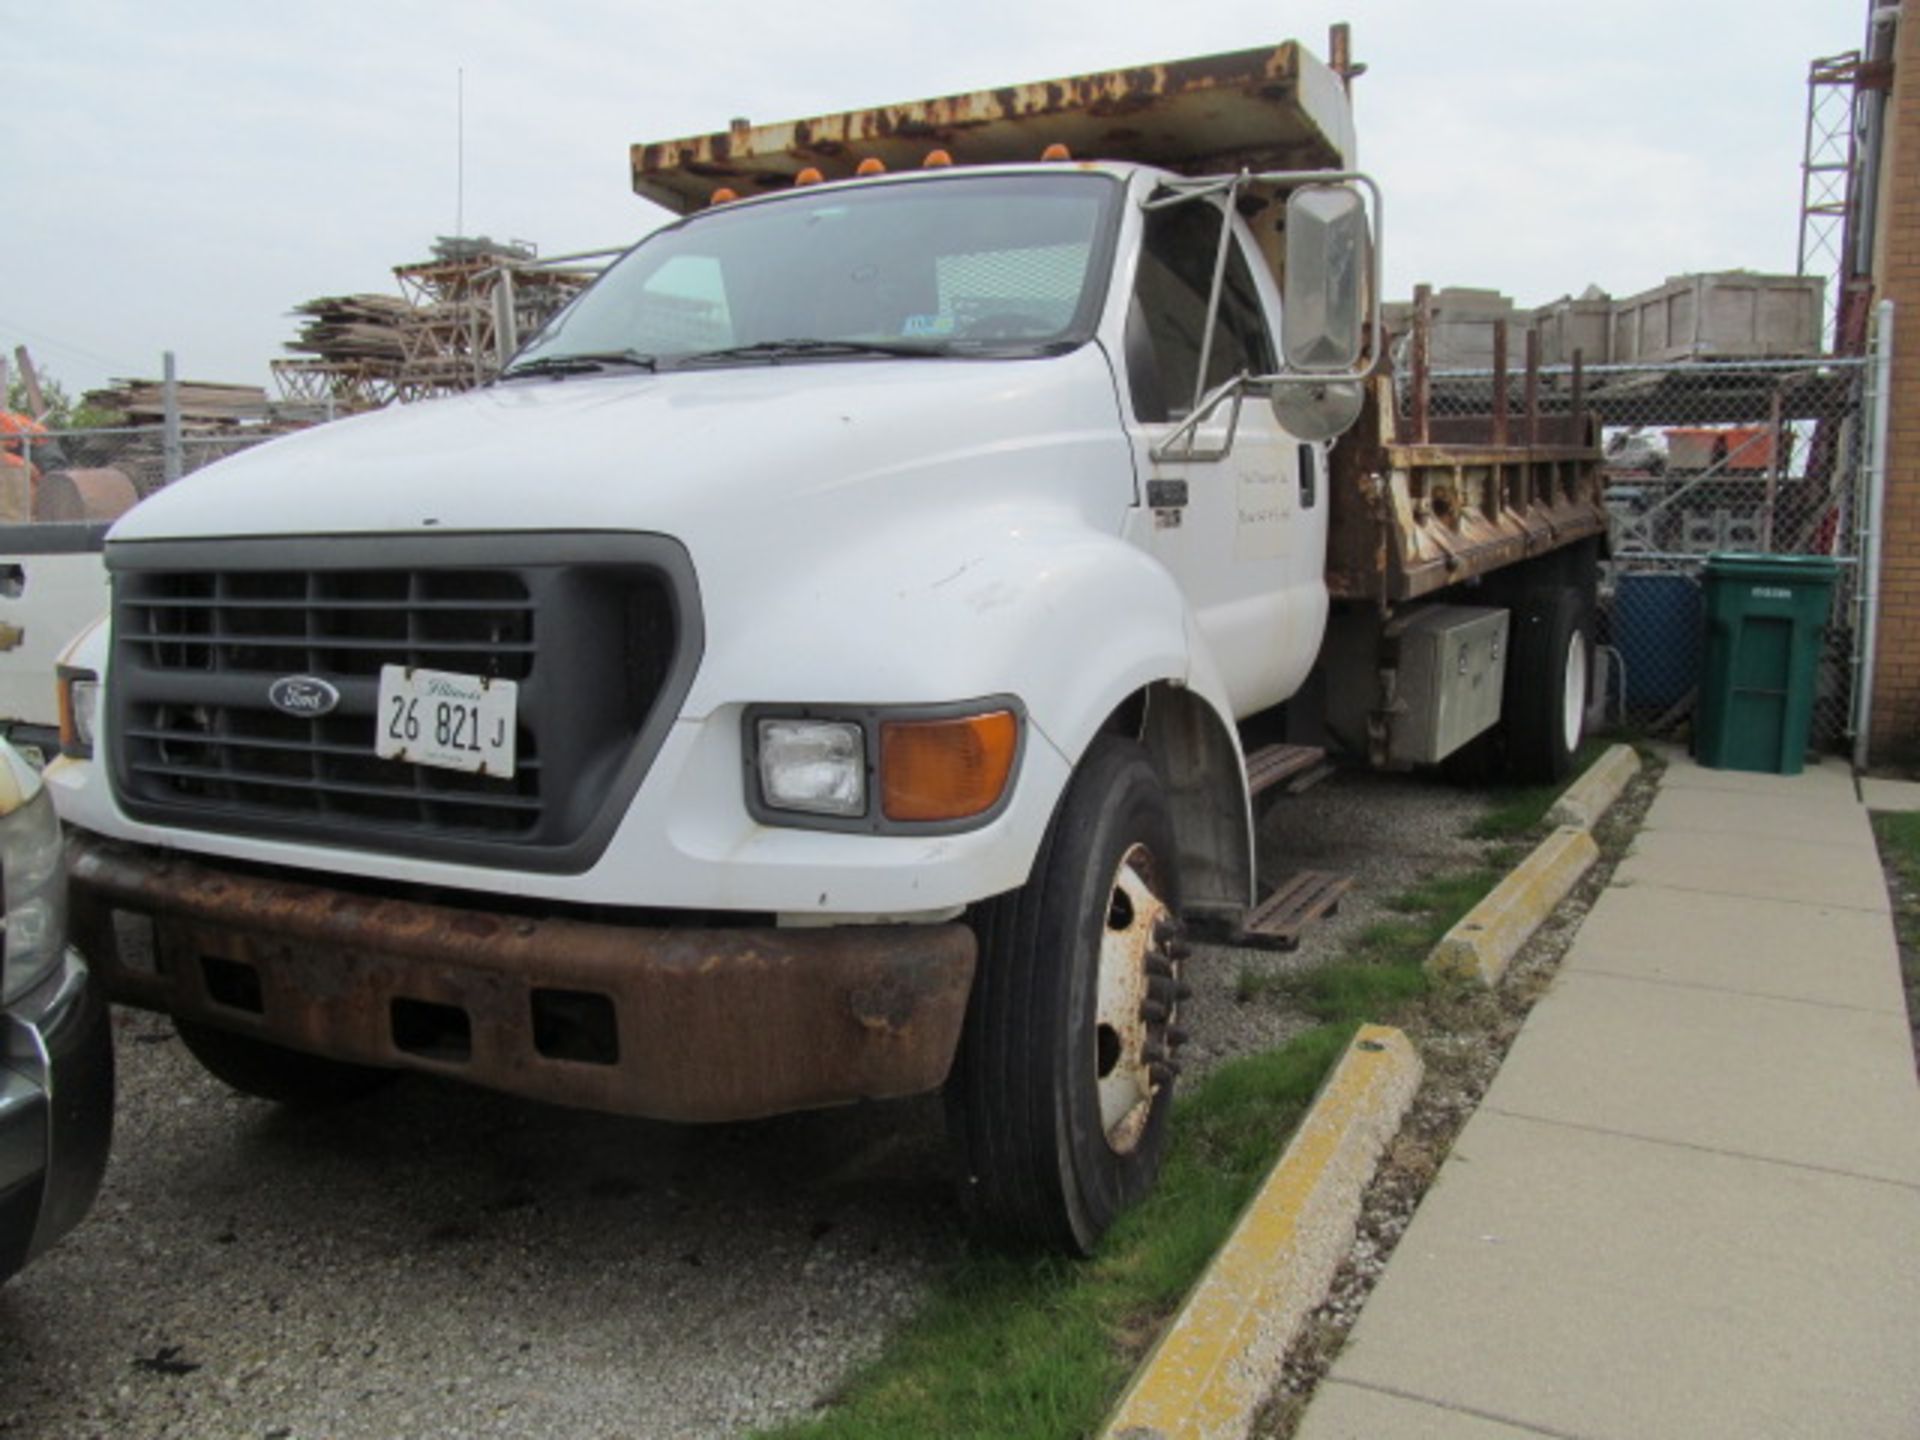 Ford 2001 650 Dump Truck VIN 3FDNF65Z31M6Y867, Located At: 305 Industrial Ln, Wheeling, IL 60090